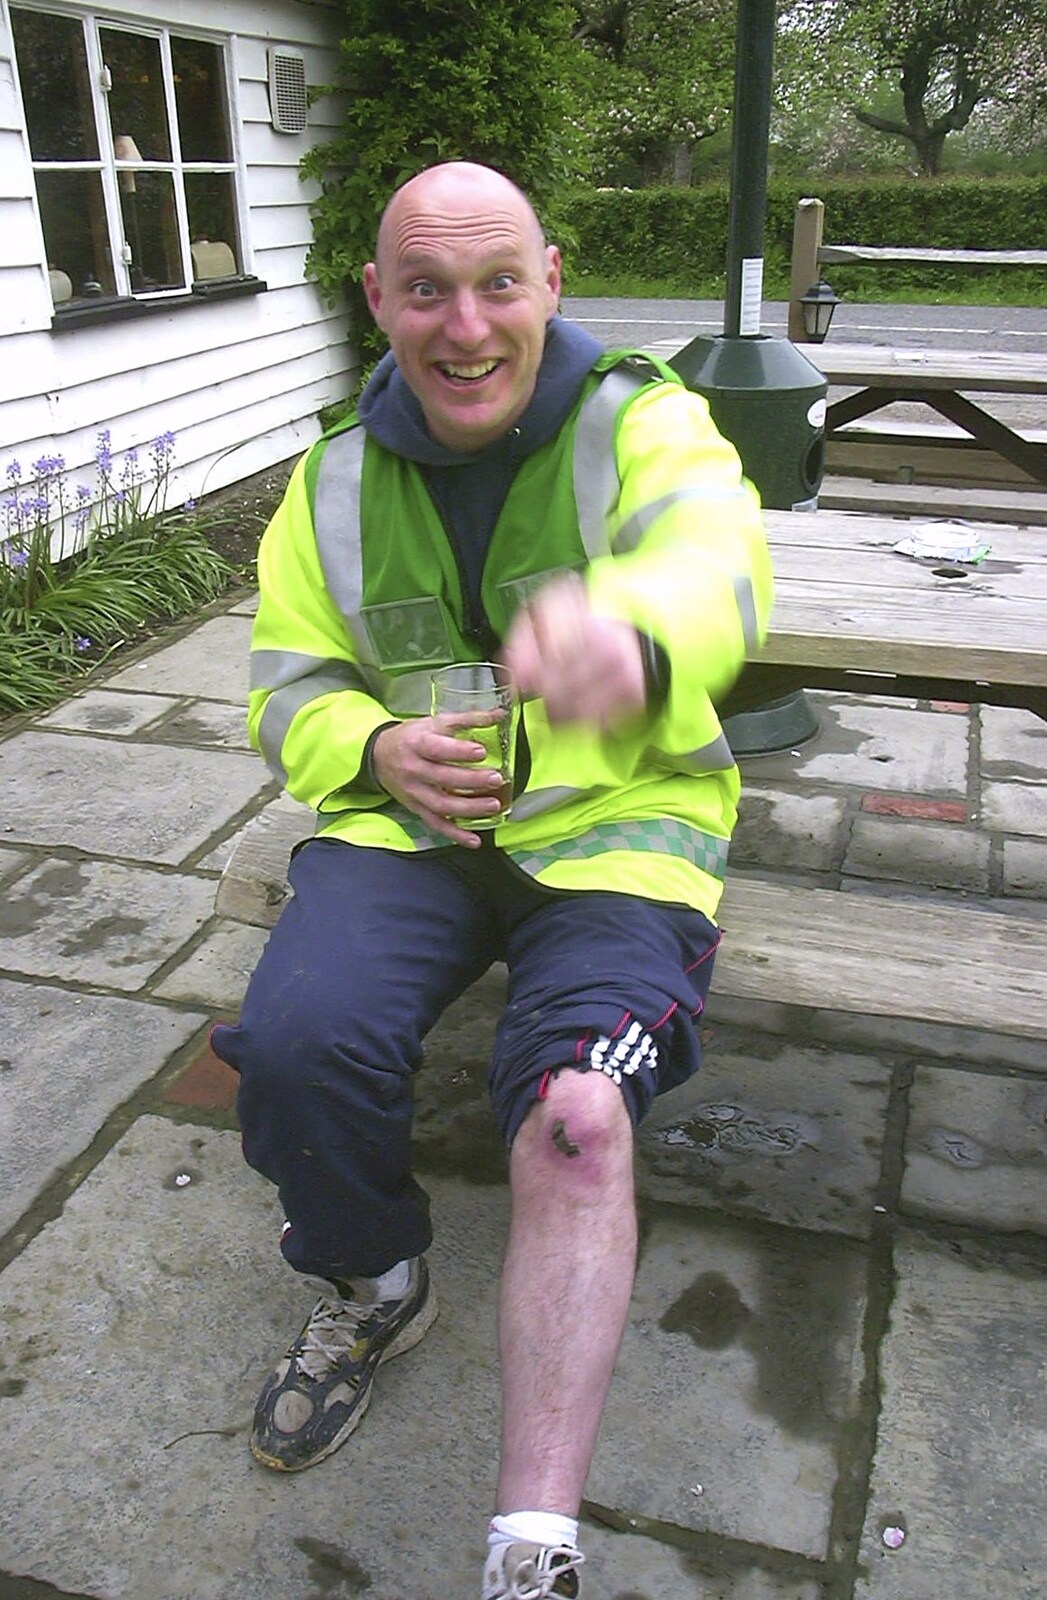 Gov shows off a scar from The BSCC Annual Bike Ride, Lenham, Kent - 8th May 2004